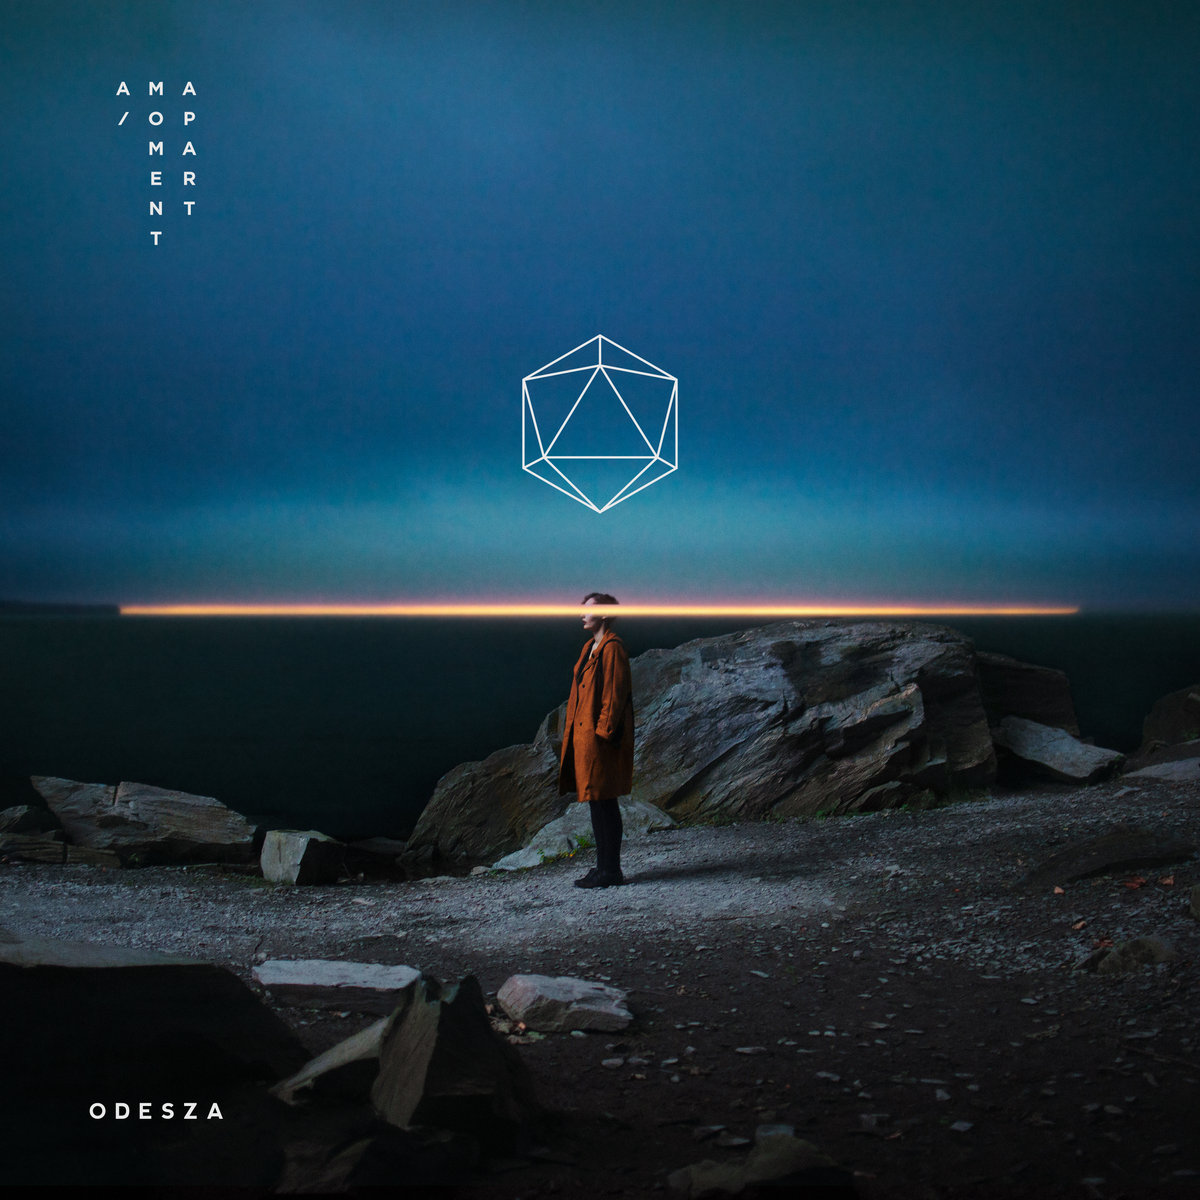 A Moment Apart album cover by ODESZA. Photo by: ODESZA